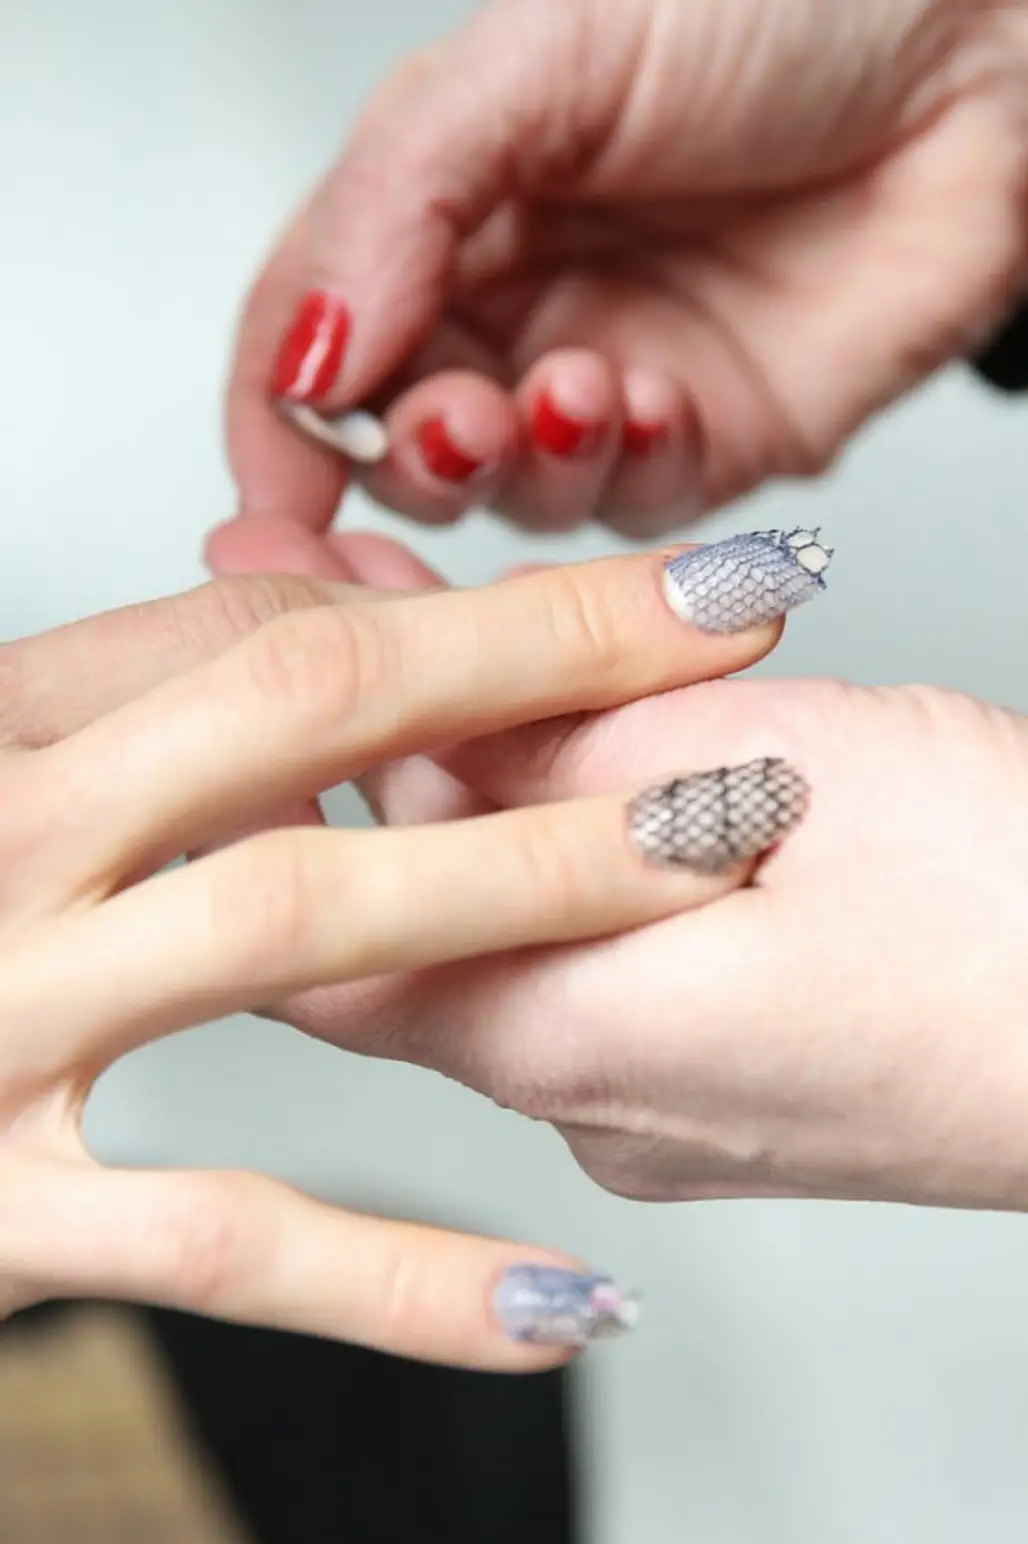 Use Lace to Create Fancy Nail Art in Any Color